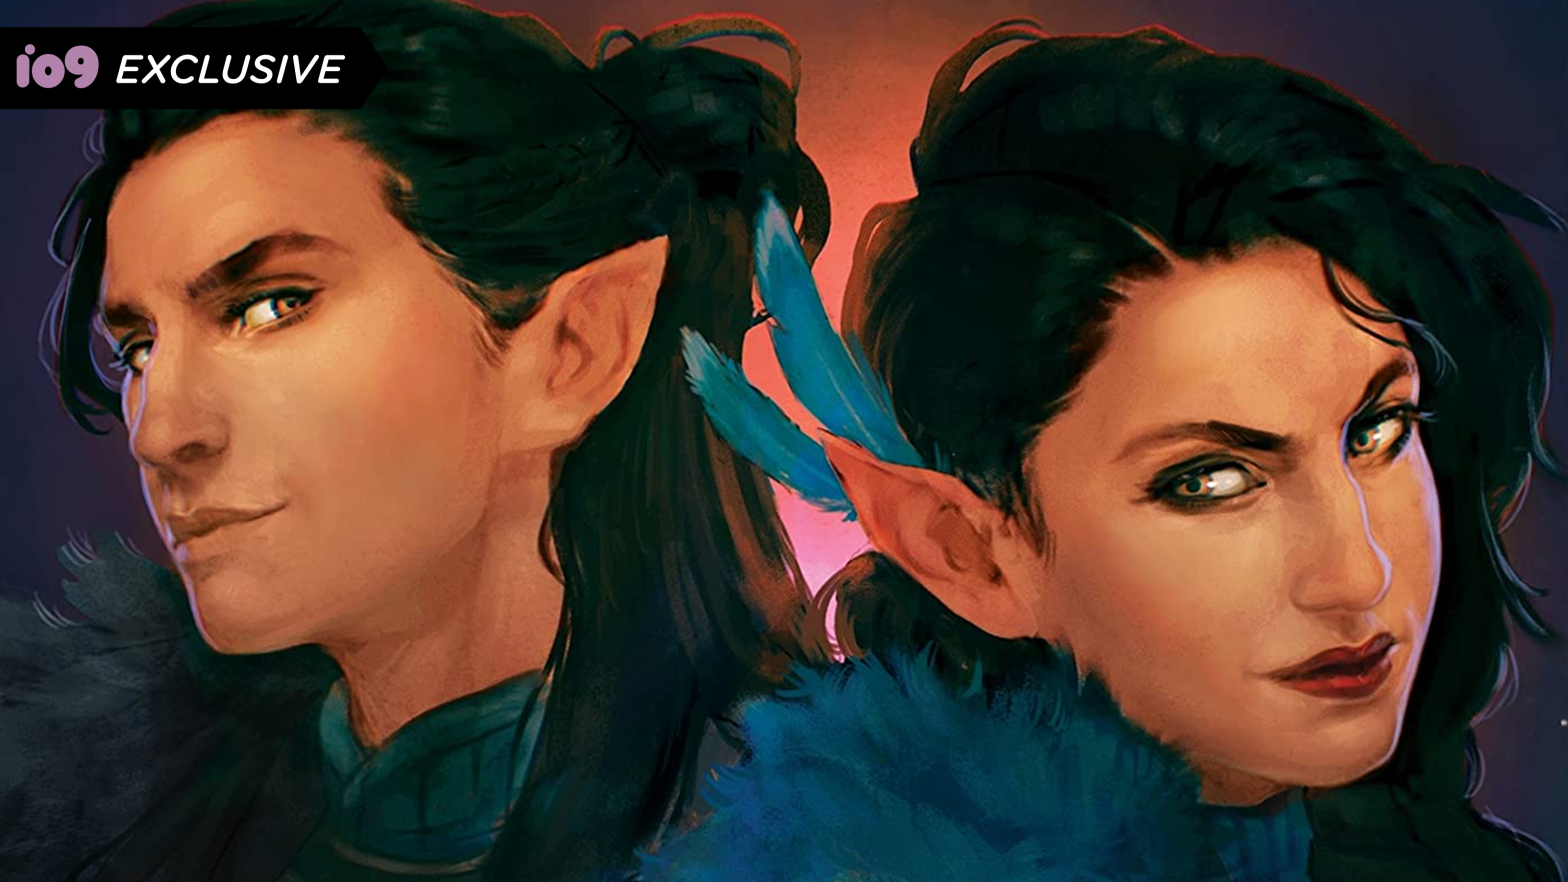 Vox Machina's Elven siblings are ready to see their story told. (Image: Nikki Dawes/Del Rey)